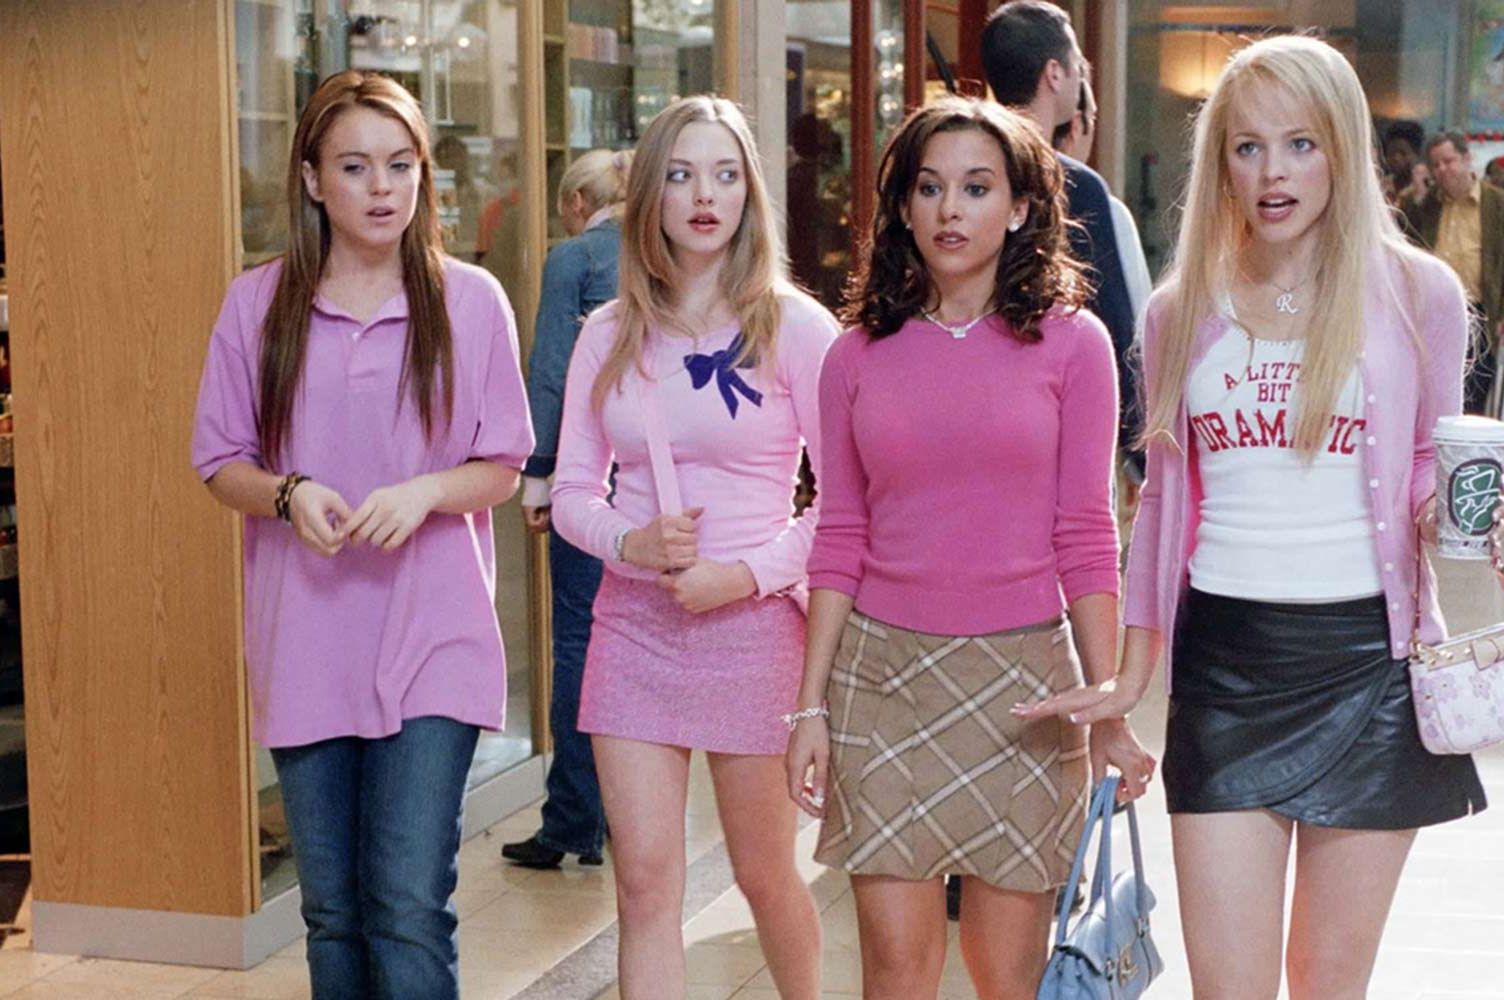 Mean Girls - Cady Heron Outfit Outfit